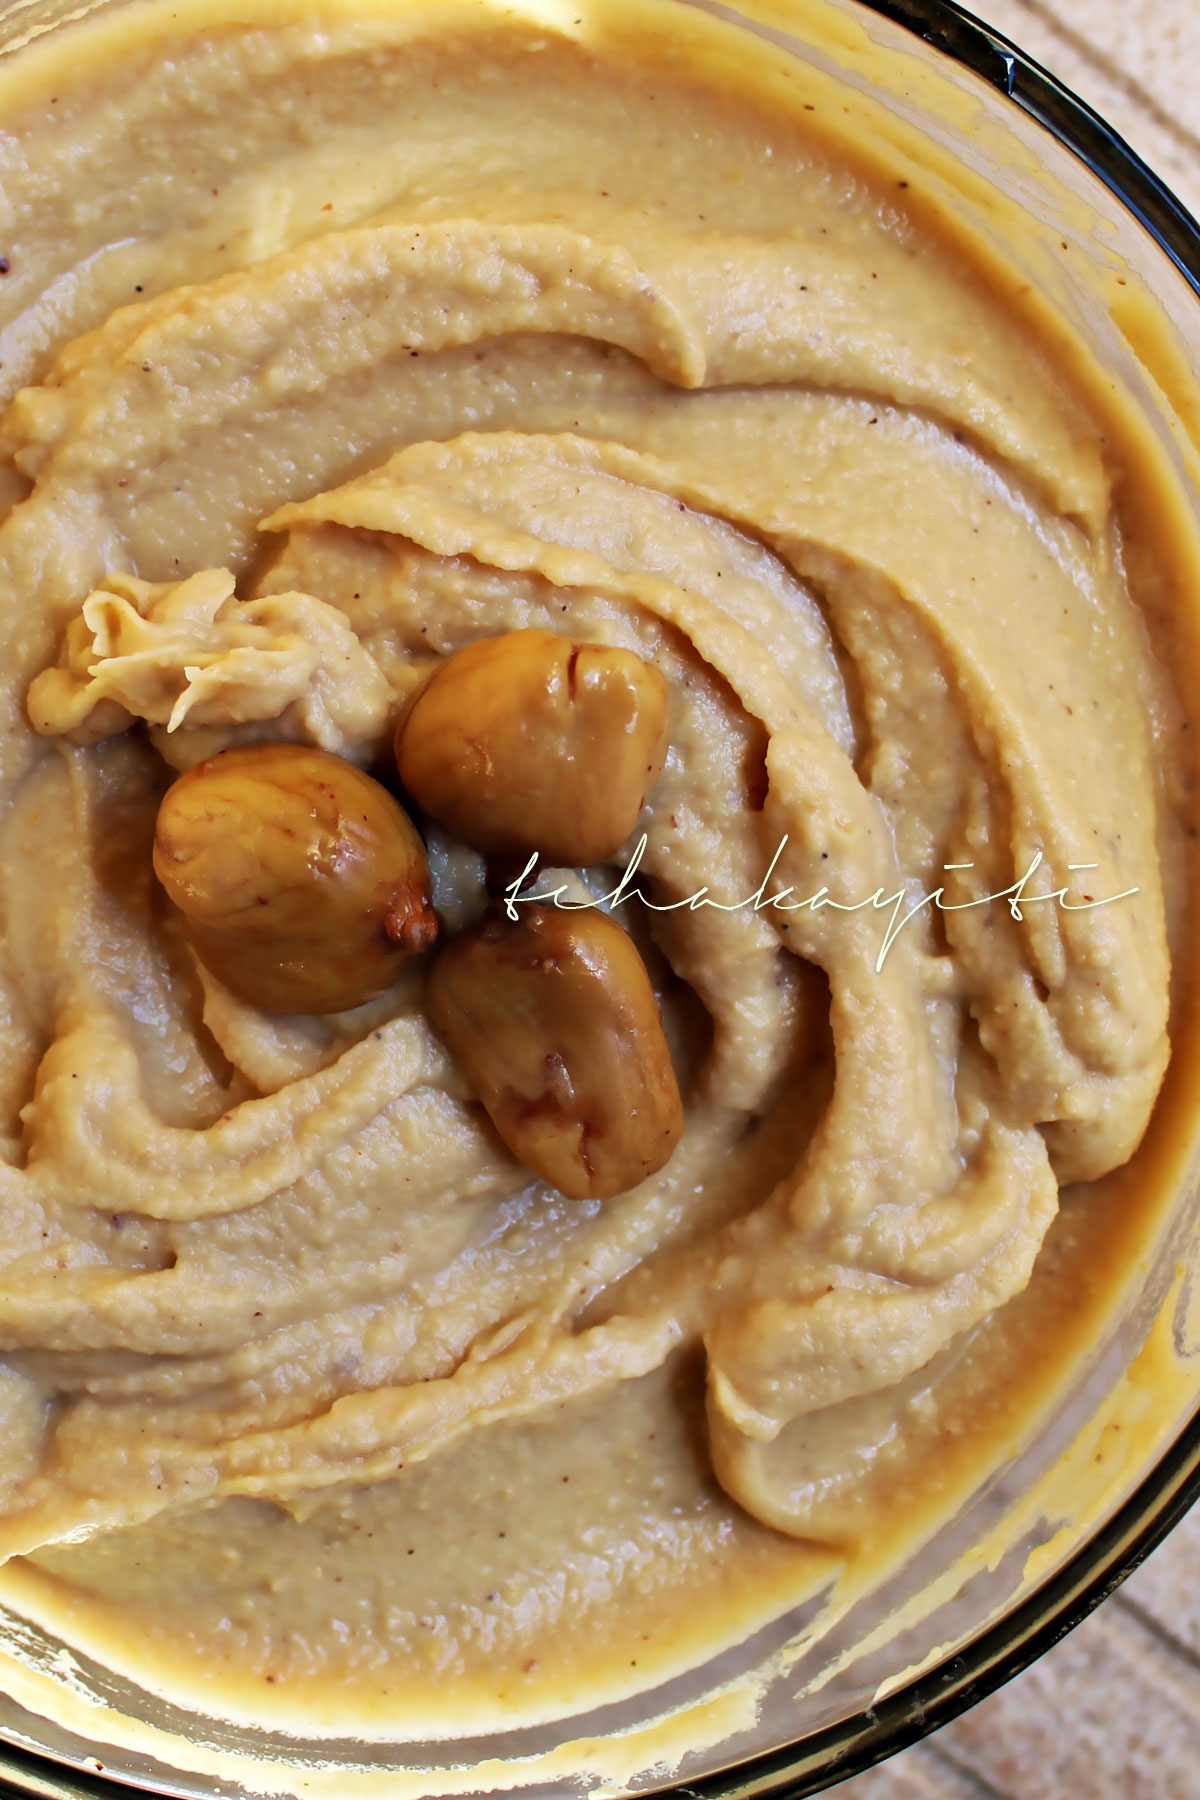 Hummus with a twist. This Caribbean hummus is made with breadnuts in lieu of garbanzo beans. A silky smooth recipe you'll want to try. | tchakayitii.com